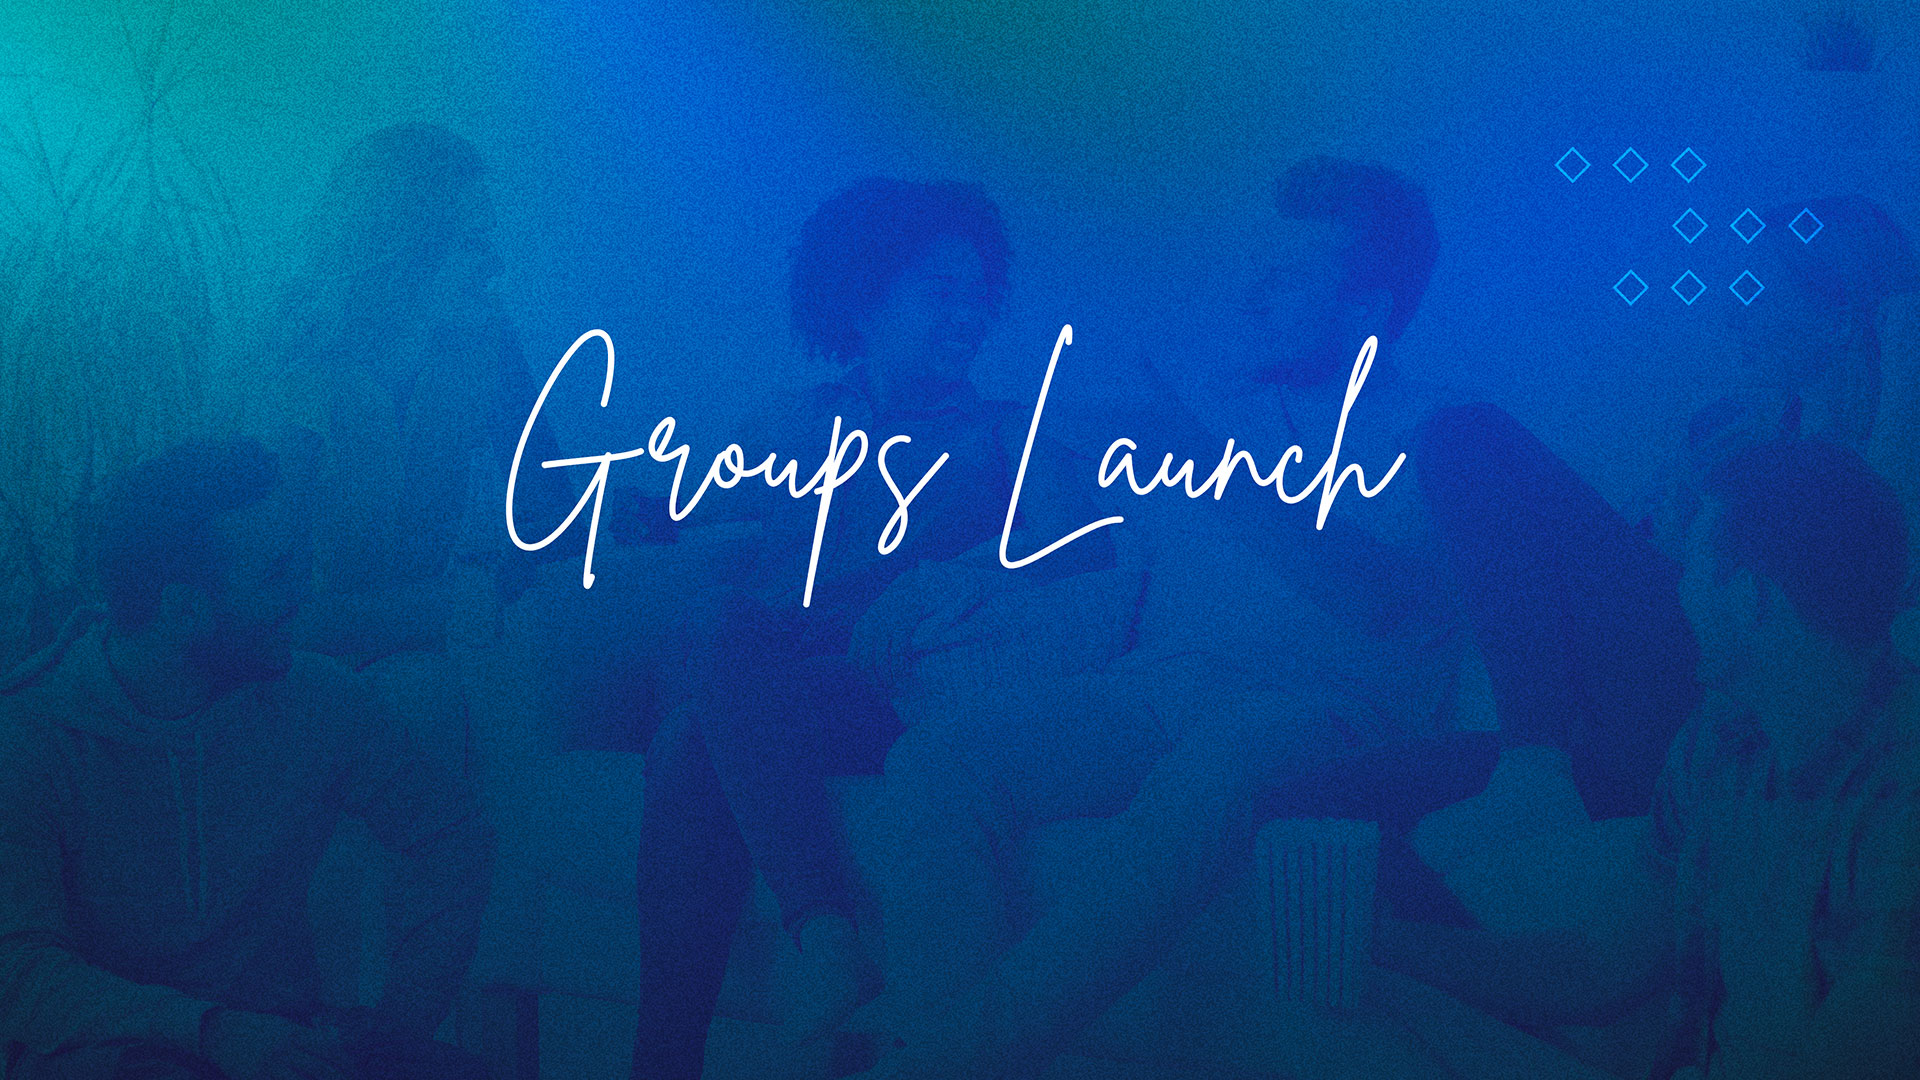 2019 - Groups Launch - Fall Session